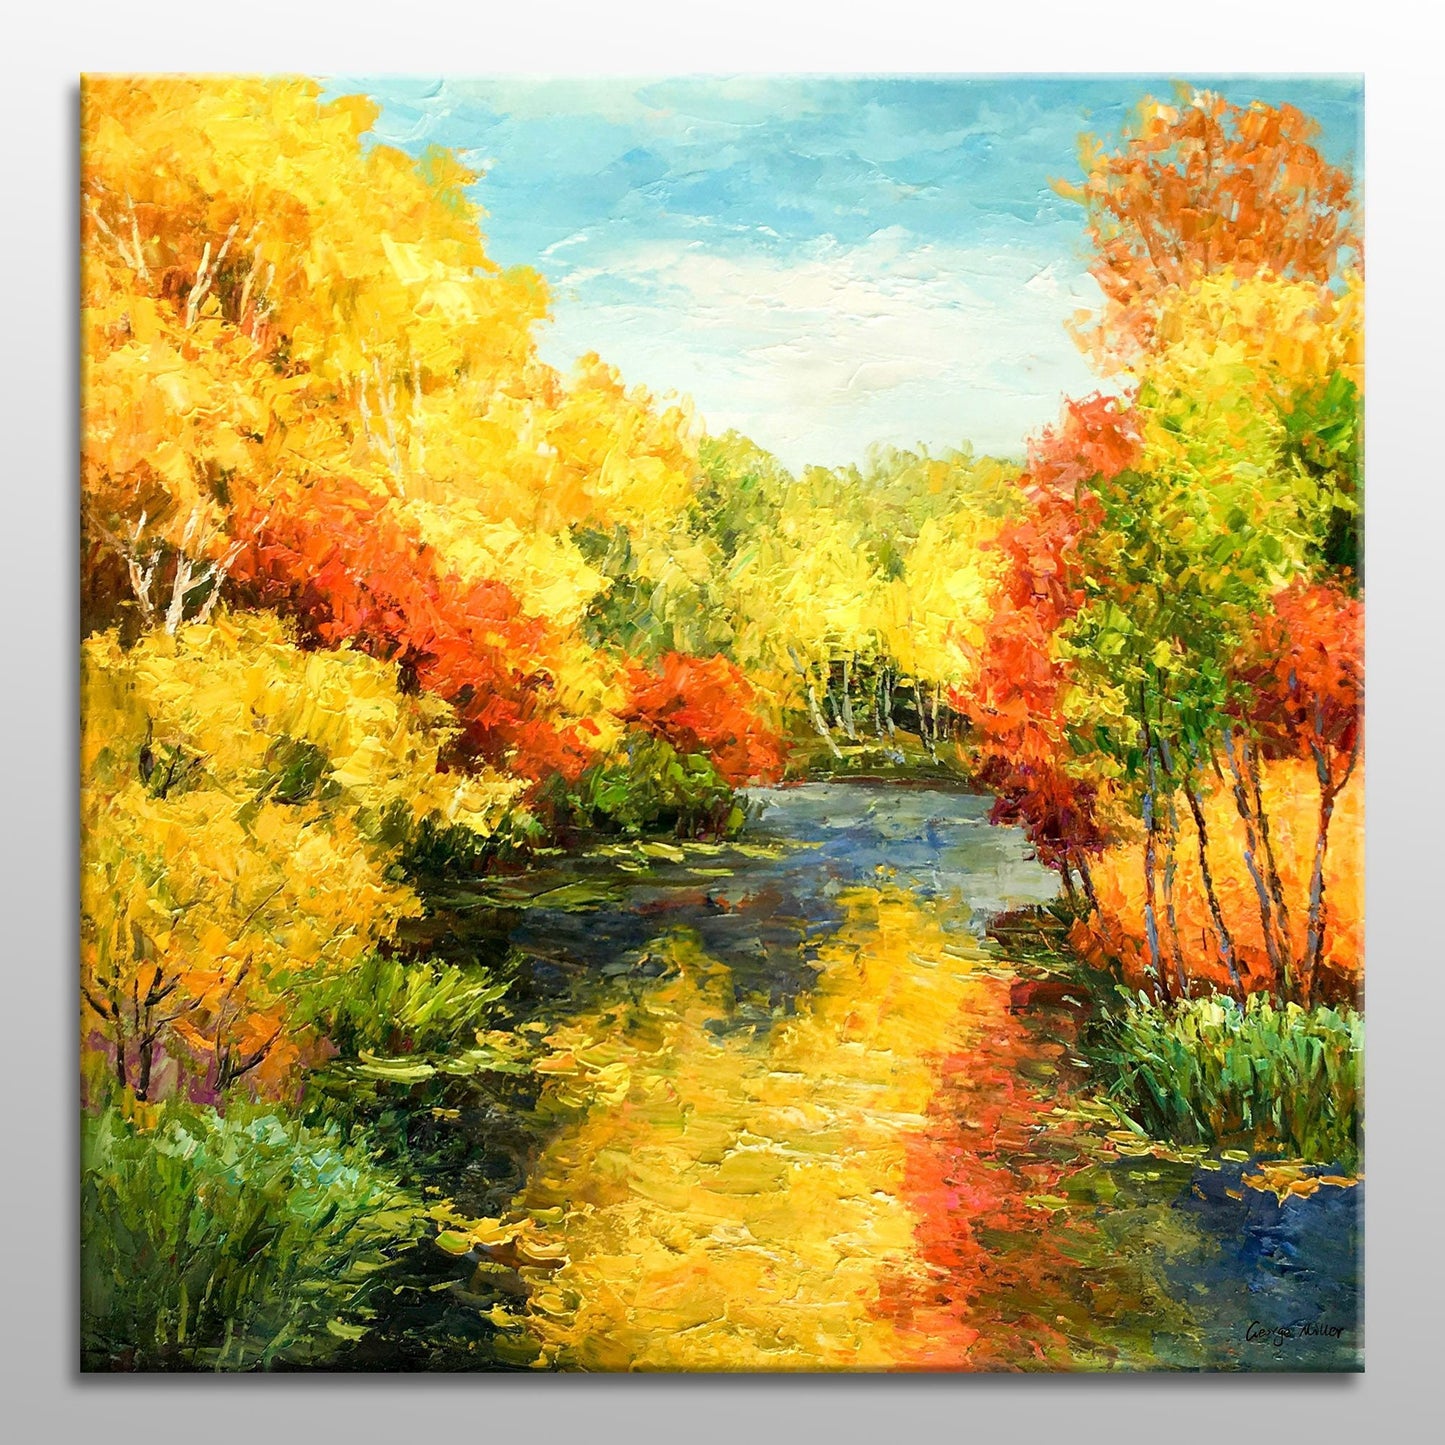 Autumn Forest Large  Wall Art, Wall Decor, Large Canvas Art, Canvas Painting, Oil Painting Abstract, Modern Painting, Oil Painting Landscape